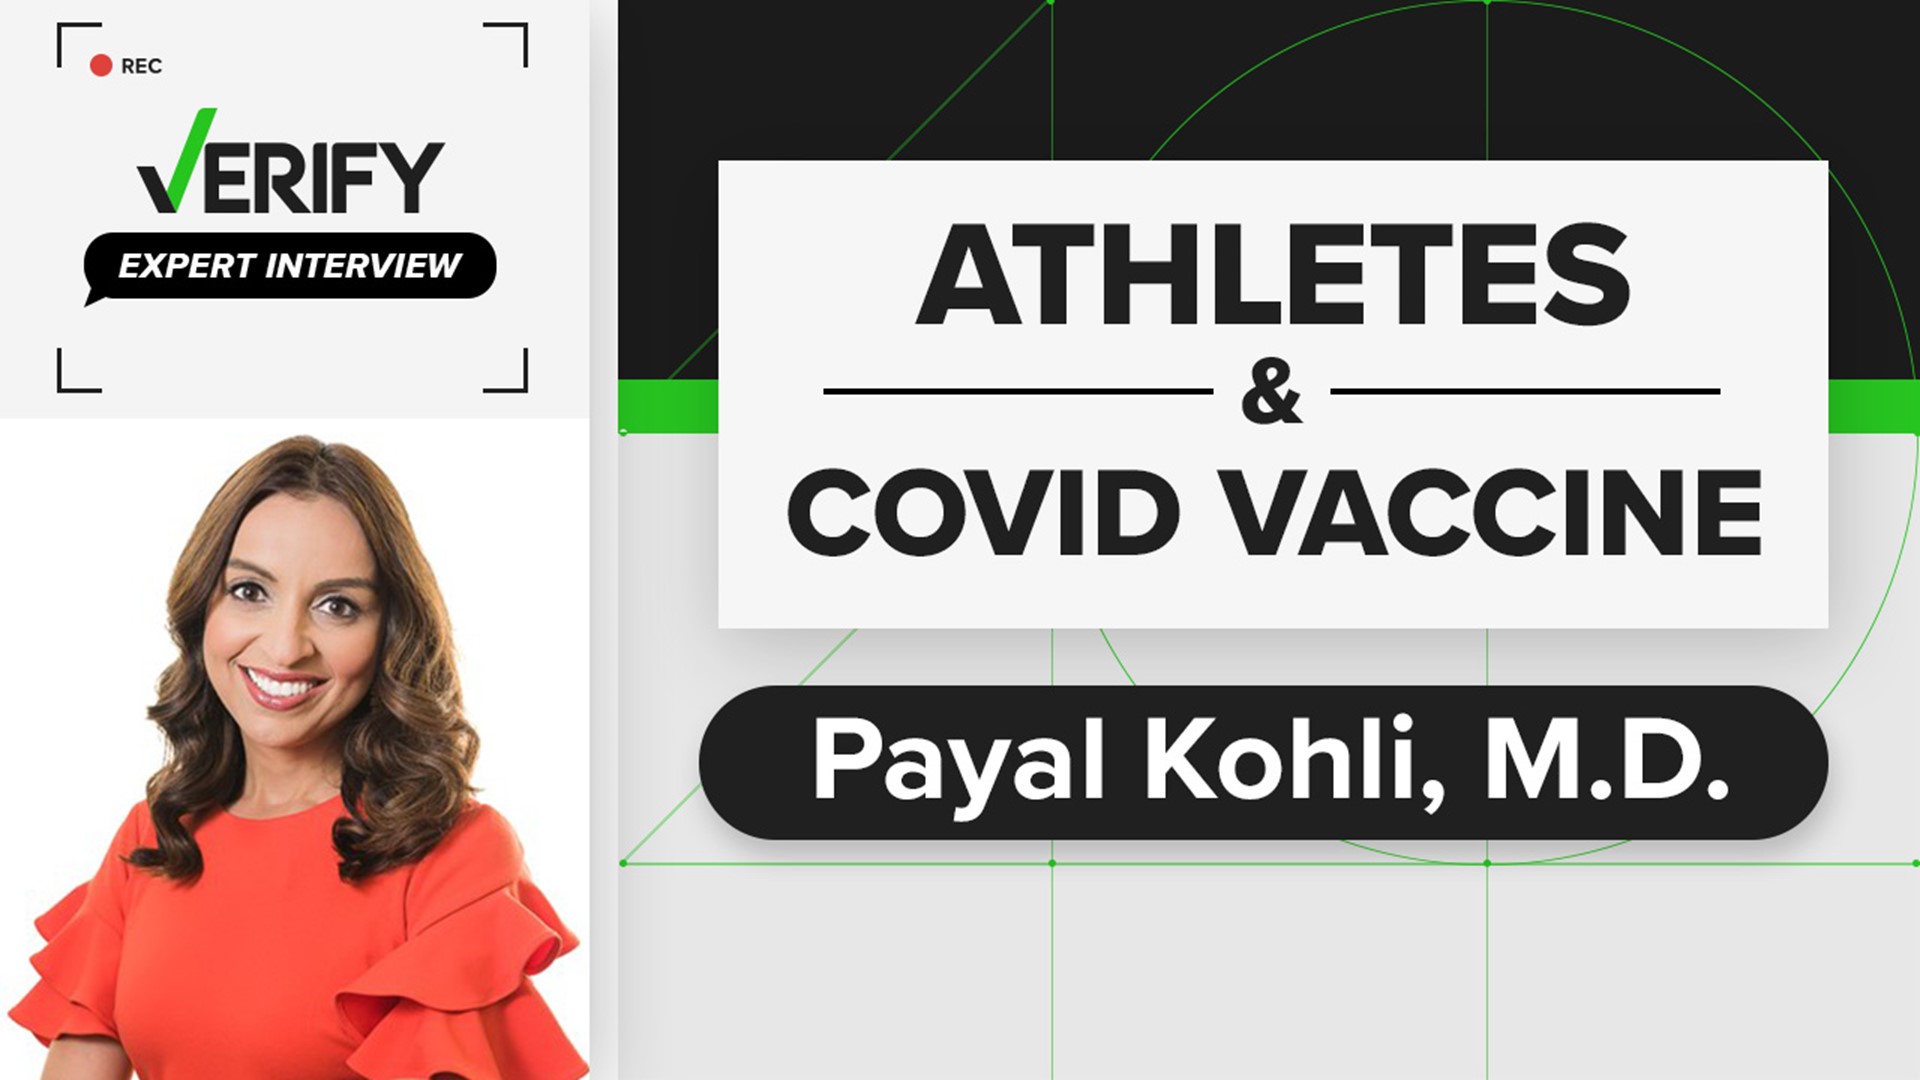 VERIFY spoke with cardiologist Payal Kohli, M.D. to clear up misinformation about the correlation between the COVID vaccine, athletes & cardiac arrest.